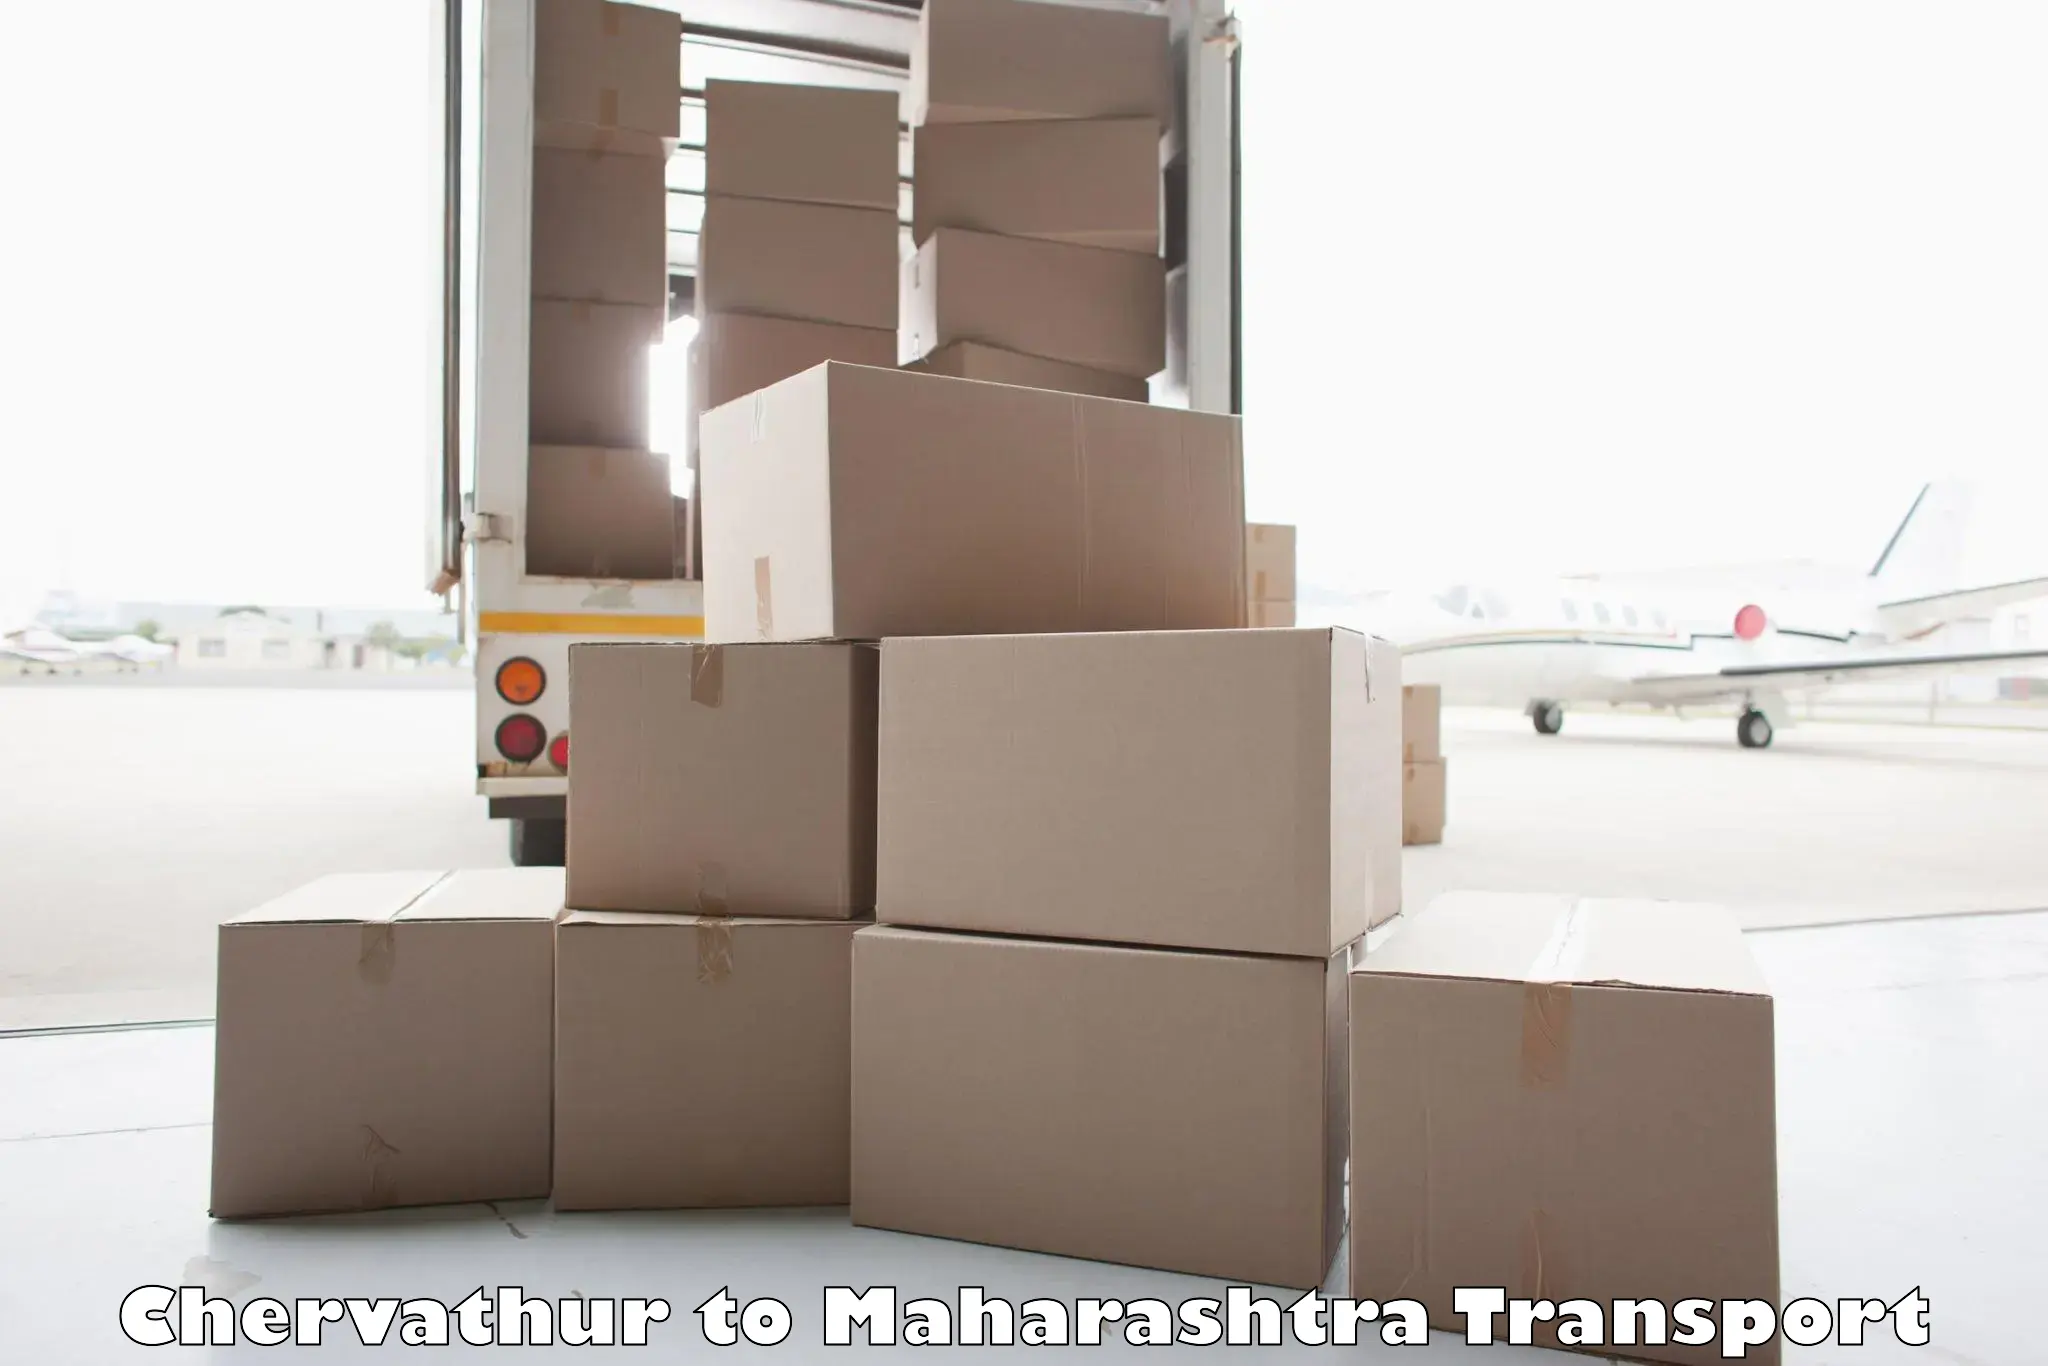 Bike shipping service Chervathur to Dharmabad